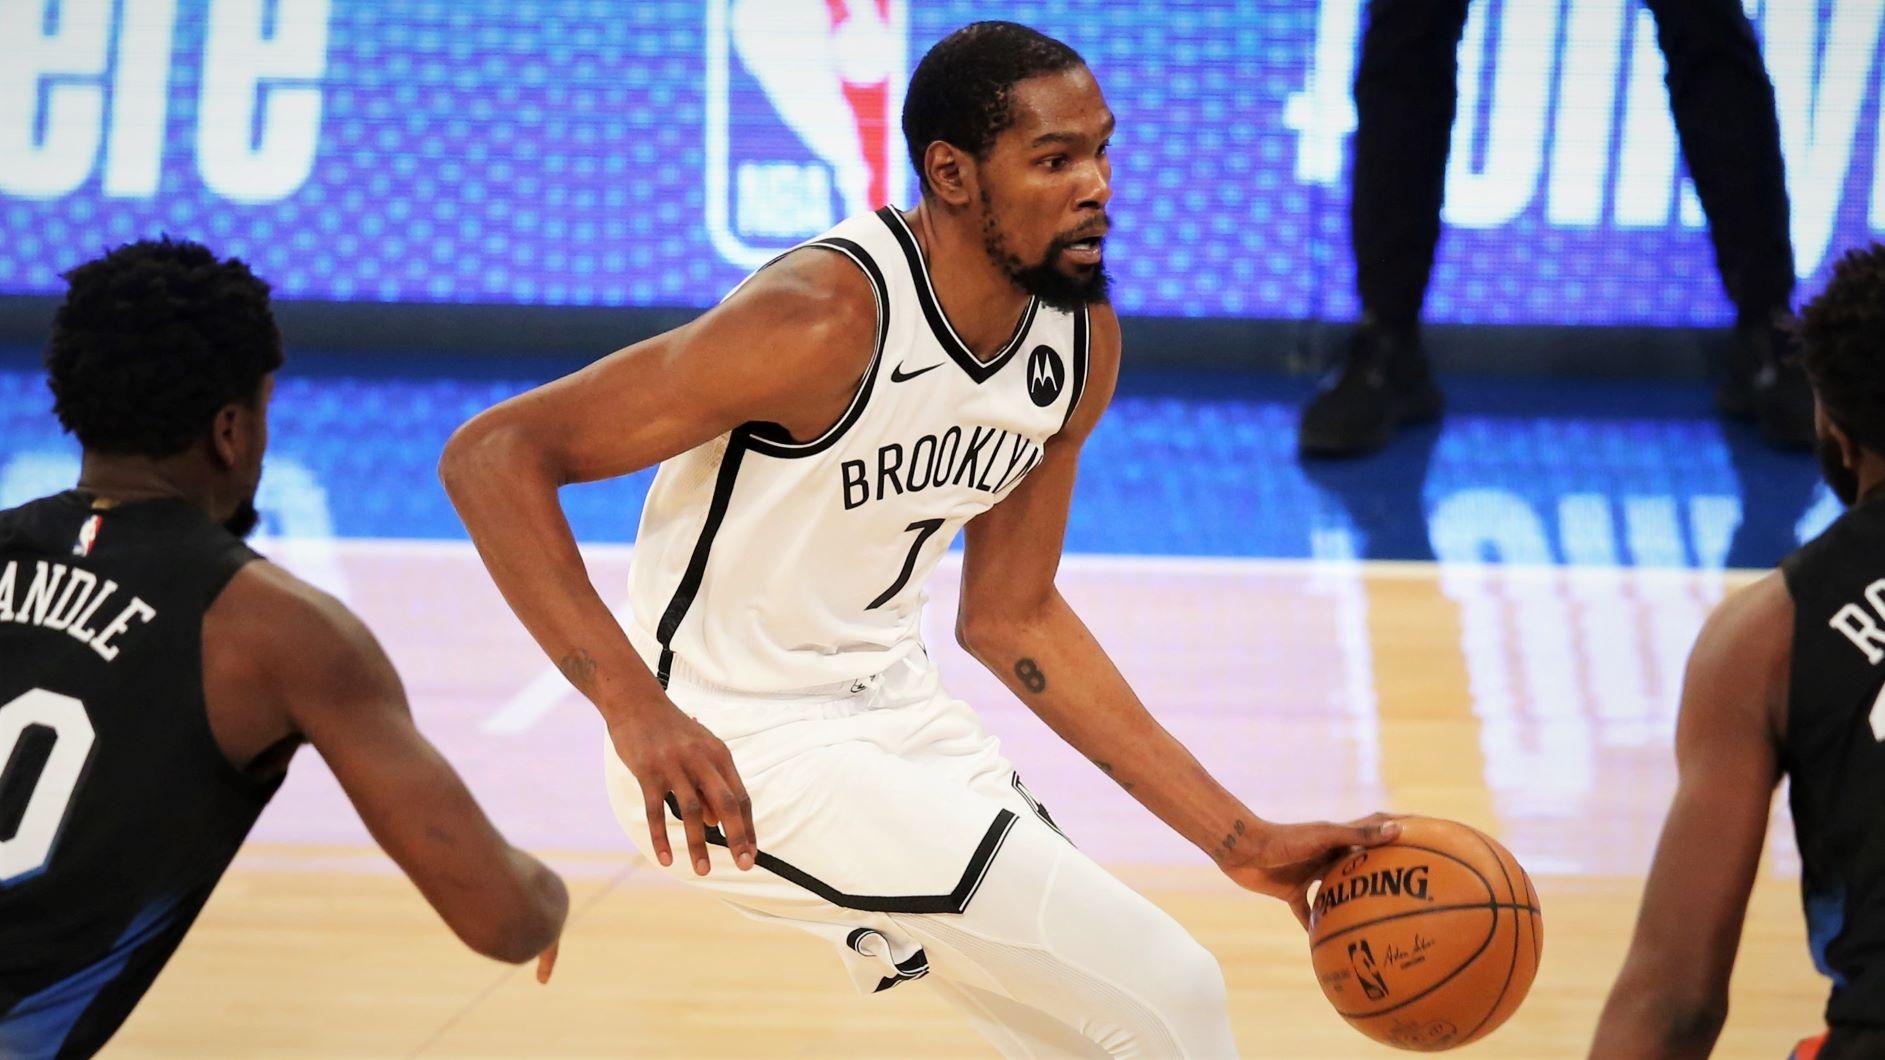 Jan 13, 2021; New York, New York, USA; Brooklyn Nets forward Kevin Durant (7) dribbles the ball against New York Knicks power forward Julius Randle (30) and center Mitchell Robinson (23) during the first quarter at Madison Square Garden. Mandatory Credit: Brad Penner-USA TODAY Sports / © Brad Penner-USA TODAY Sports